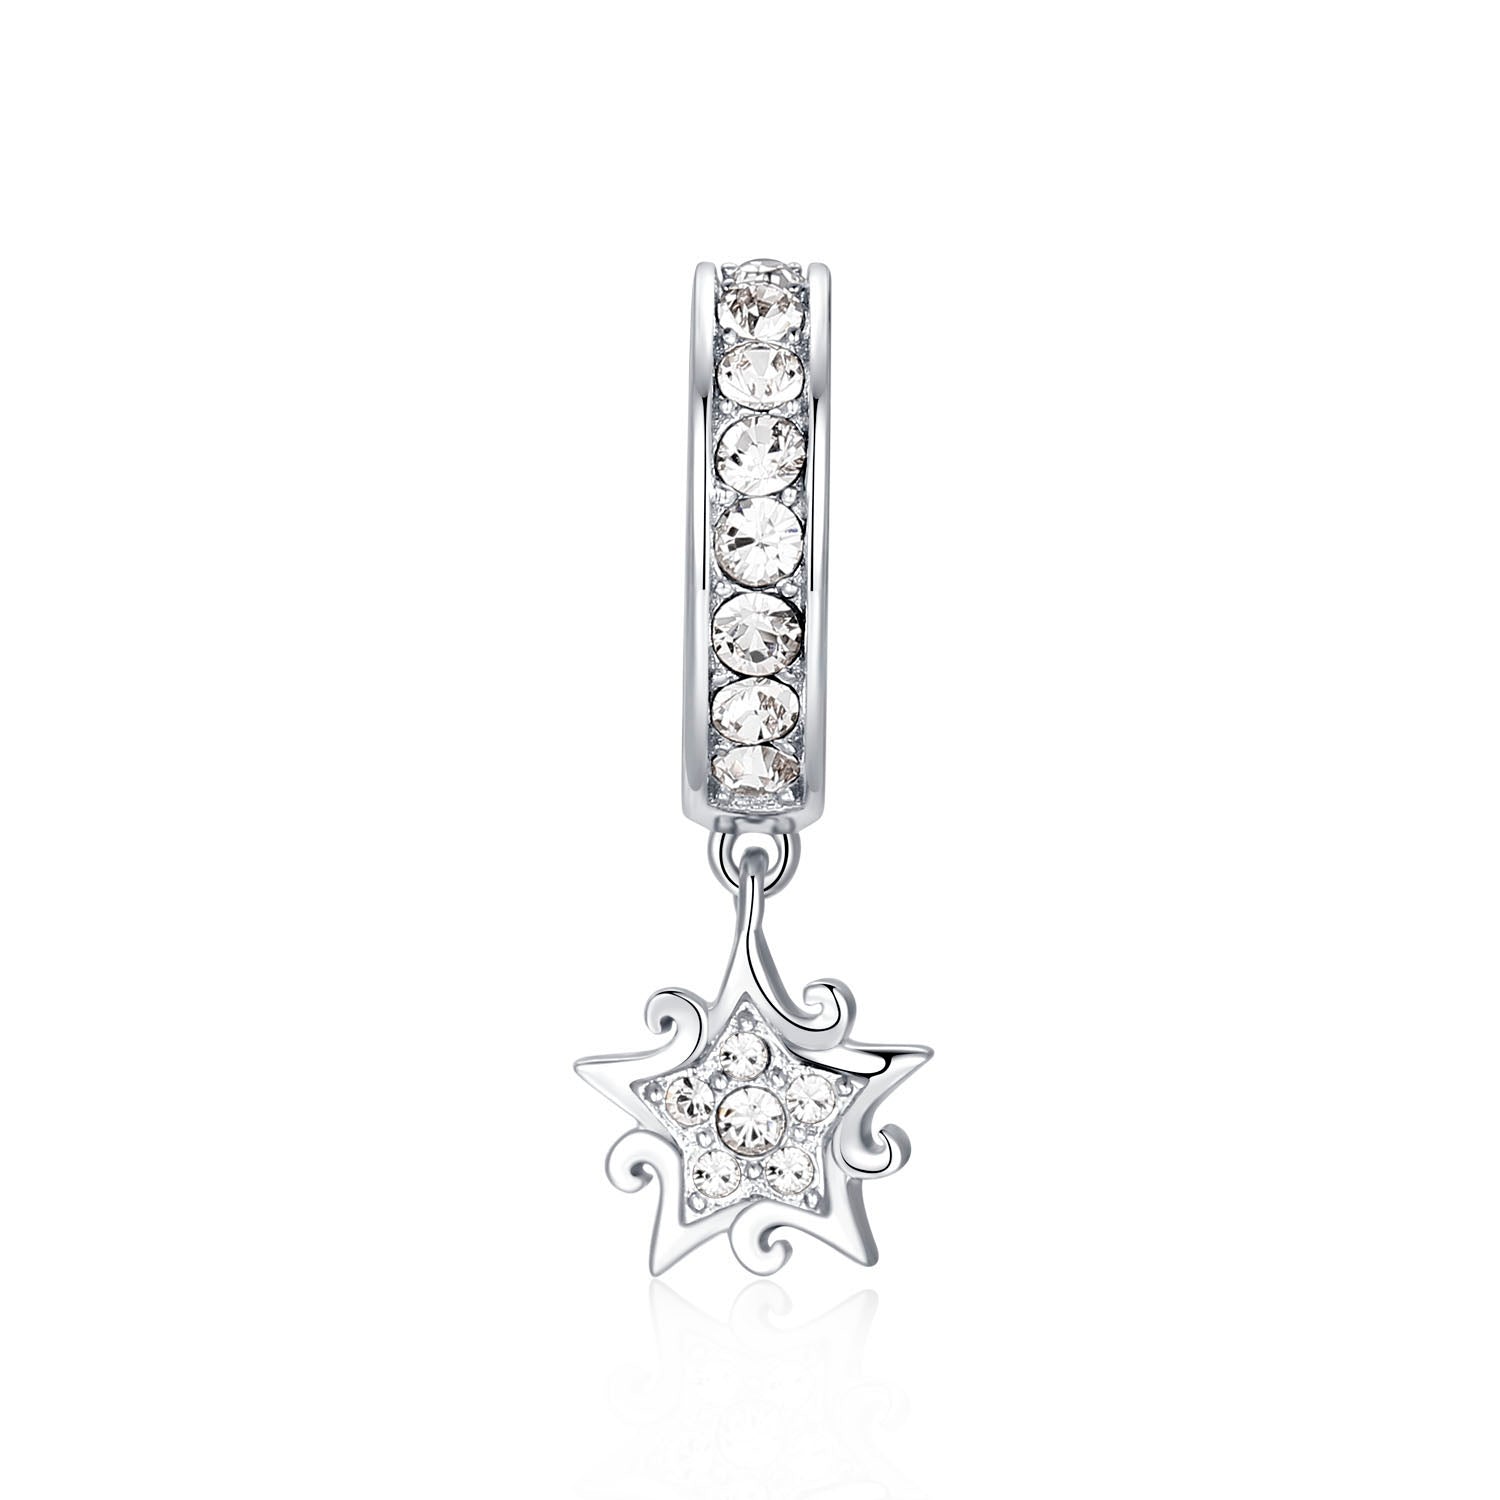 Star Glow 925 silver beads with white gold plating